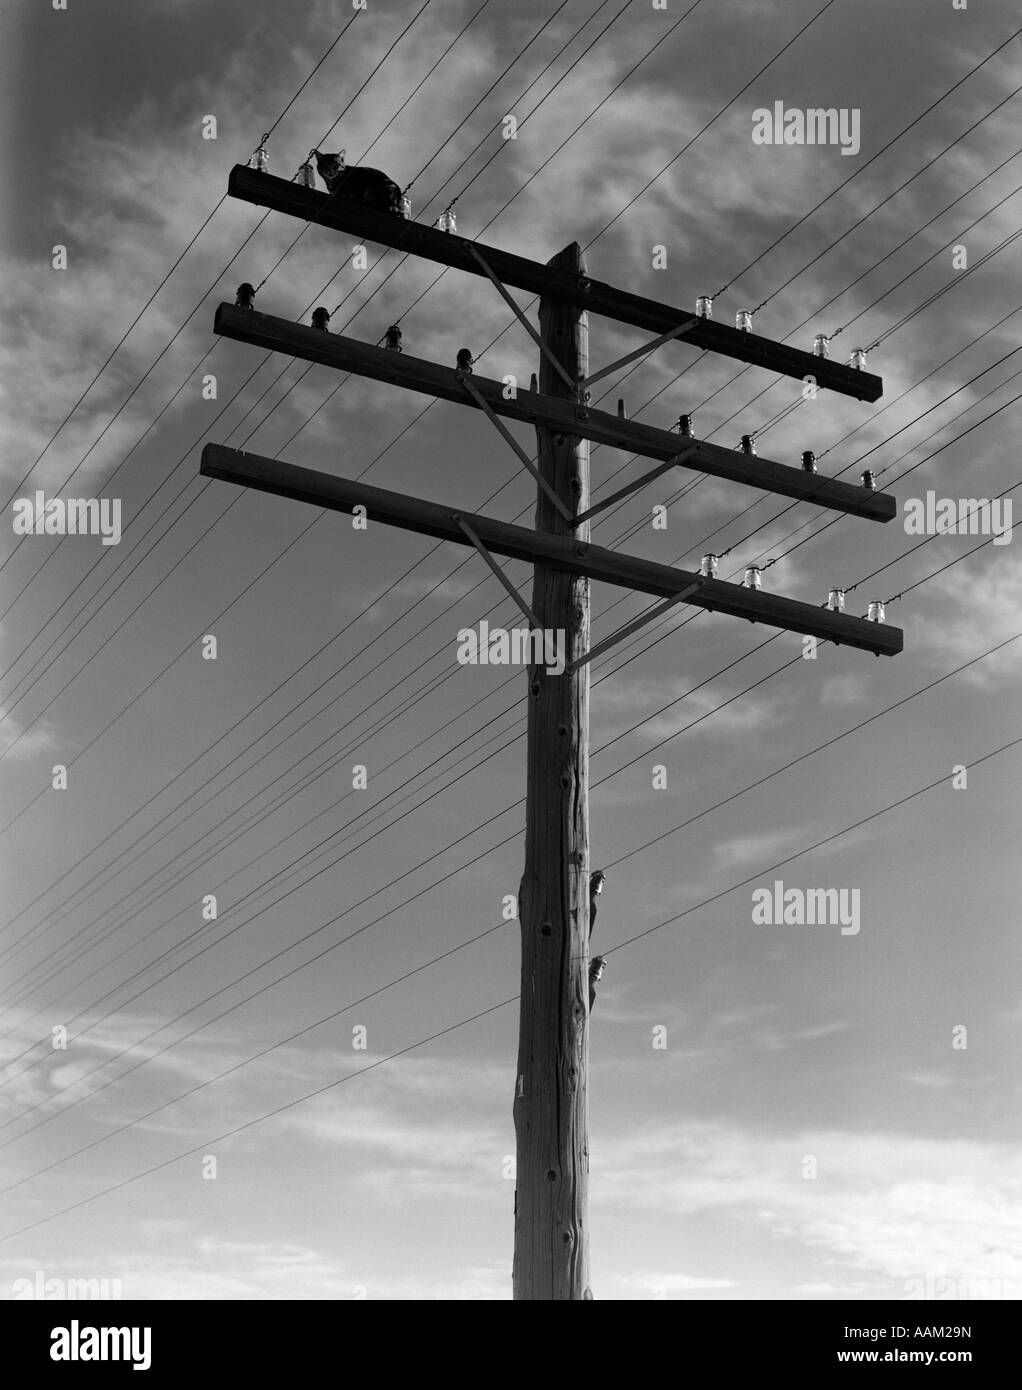 1940s CAT SITTING ON A POWER LINE TELEPHONE POLE STRANDED ALONE OUTDOOR SMALL FELINE ANIMAL 1930s 1950s Stock Photo